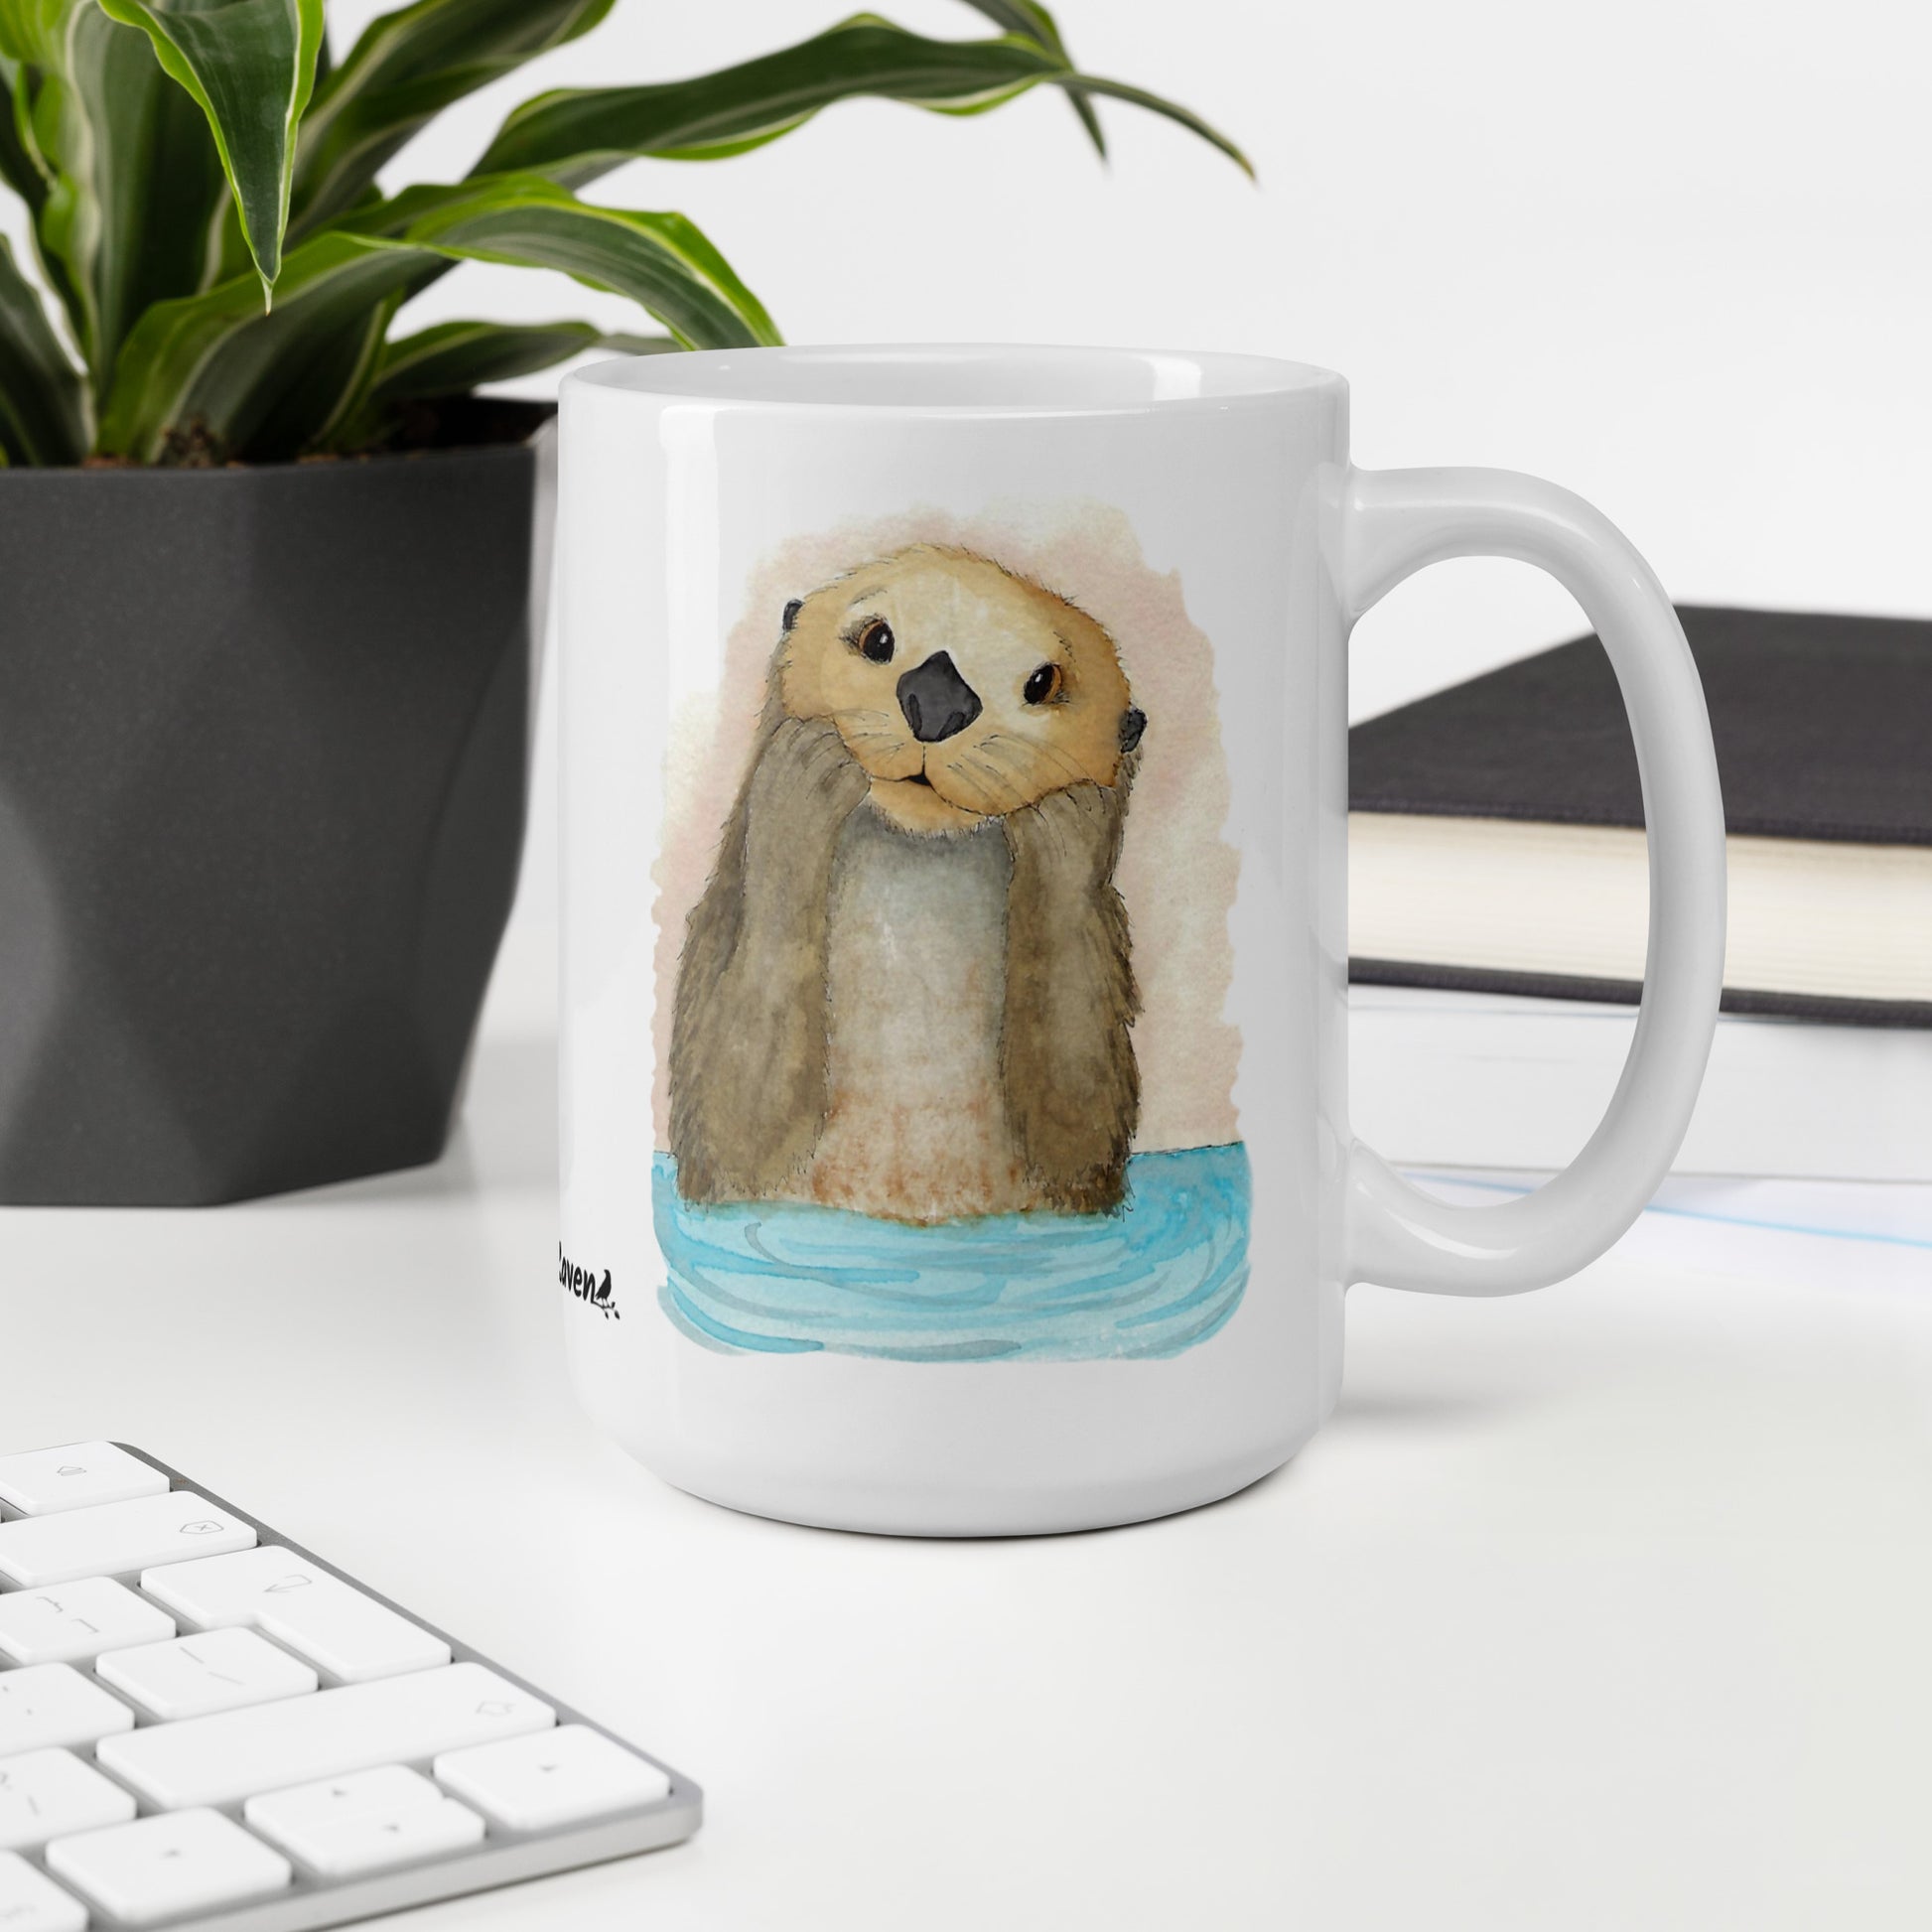 15 ounce white ceramic mug featuring watercolor print of a sea otter on both sides. Dishwasher and microwave safe. Shown on desk by keyboard, book, and potted plant.